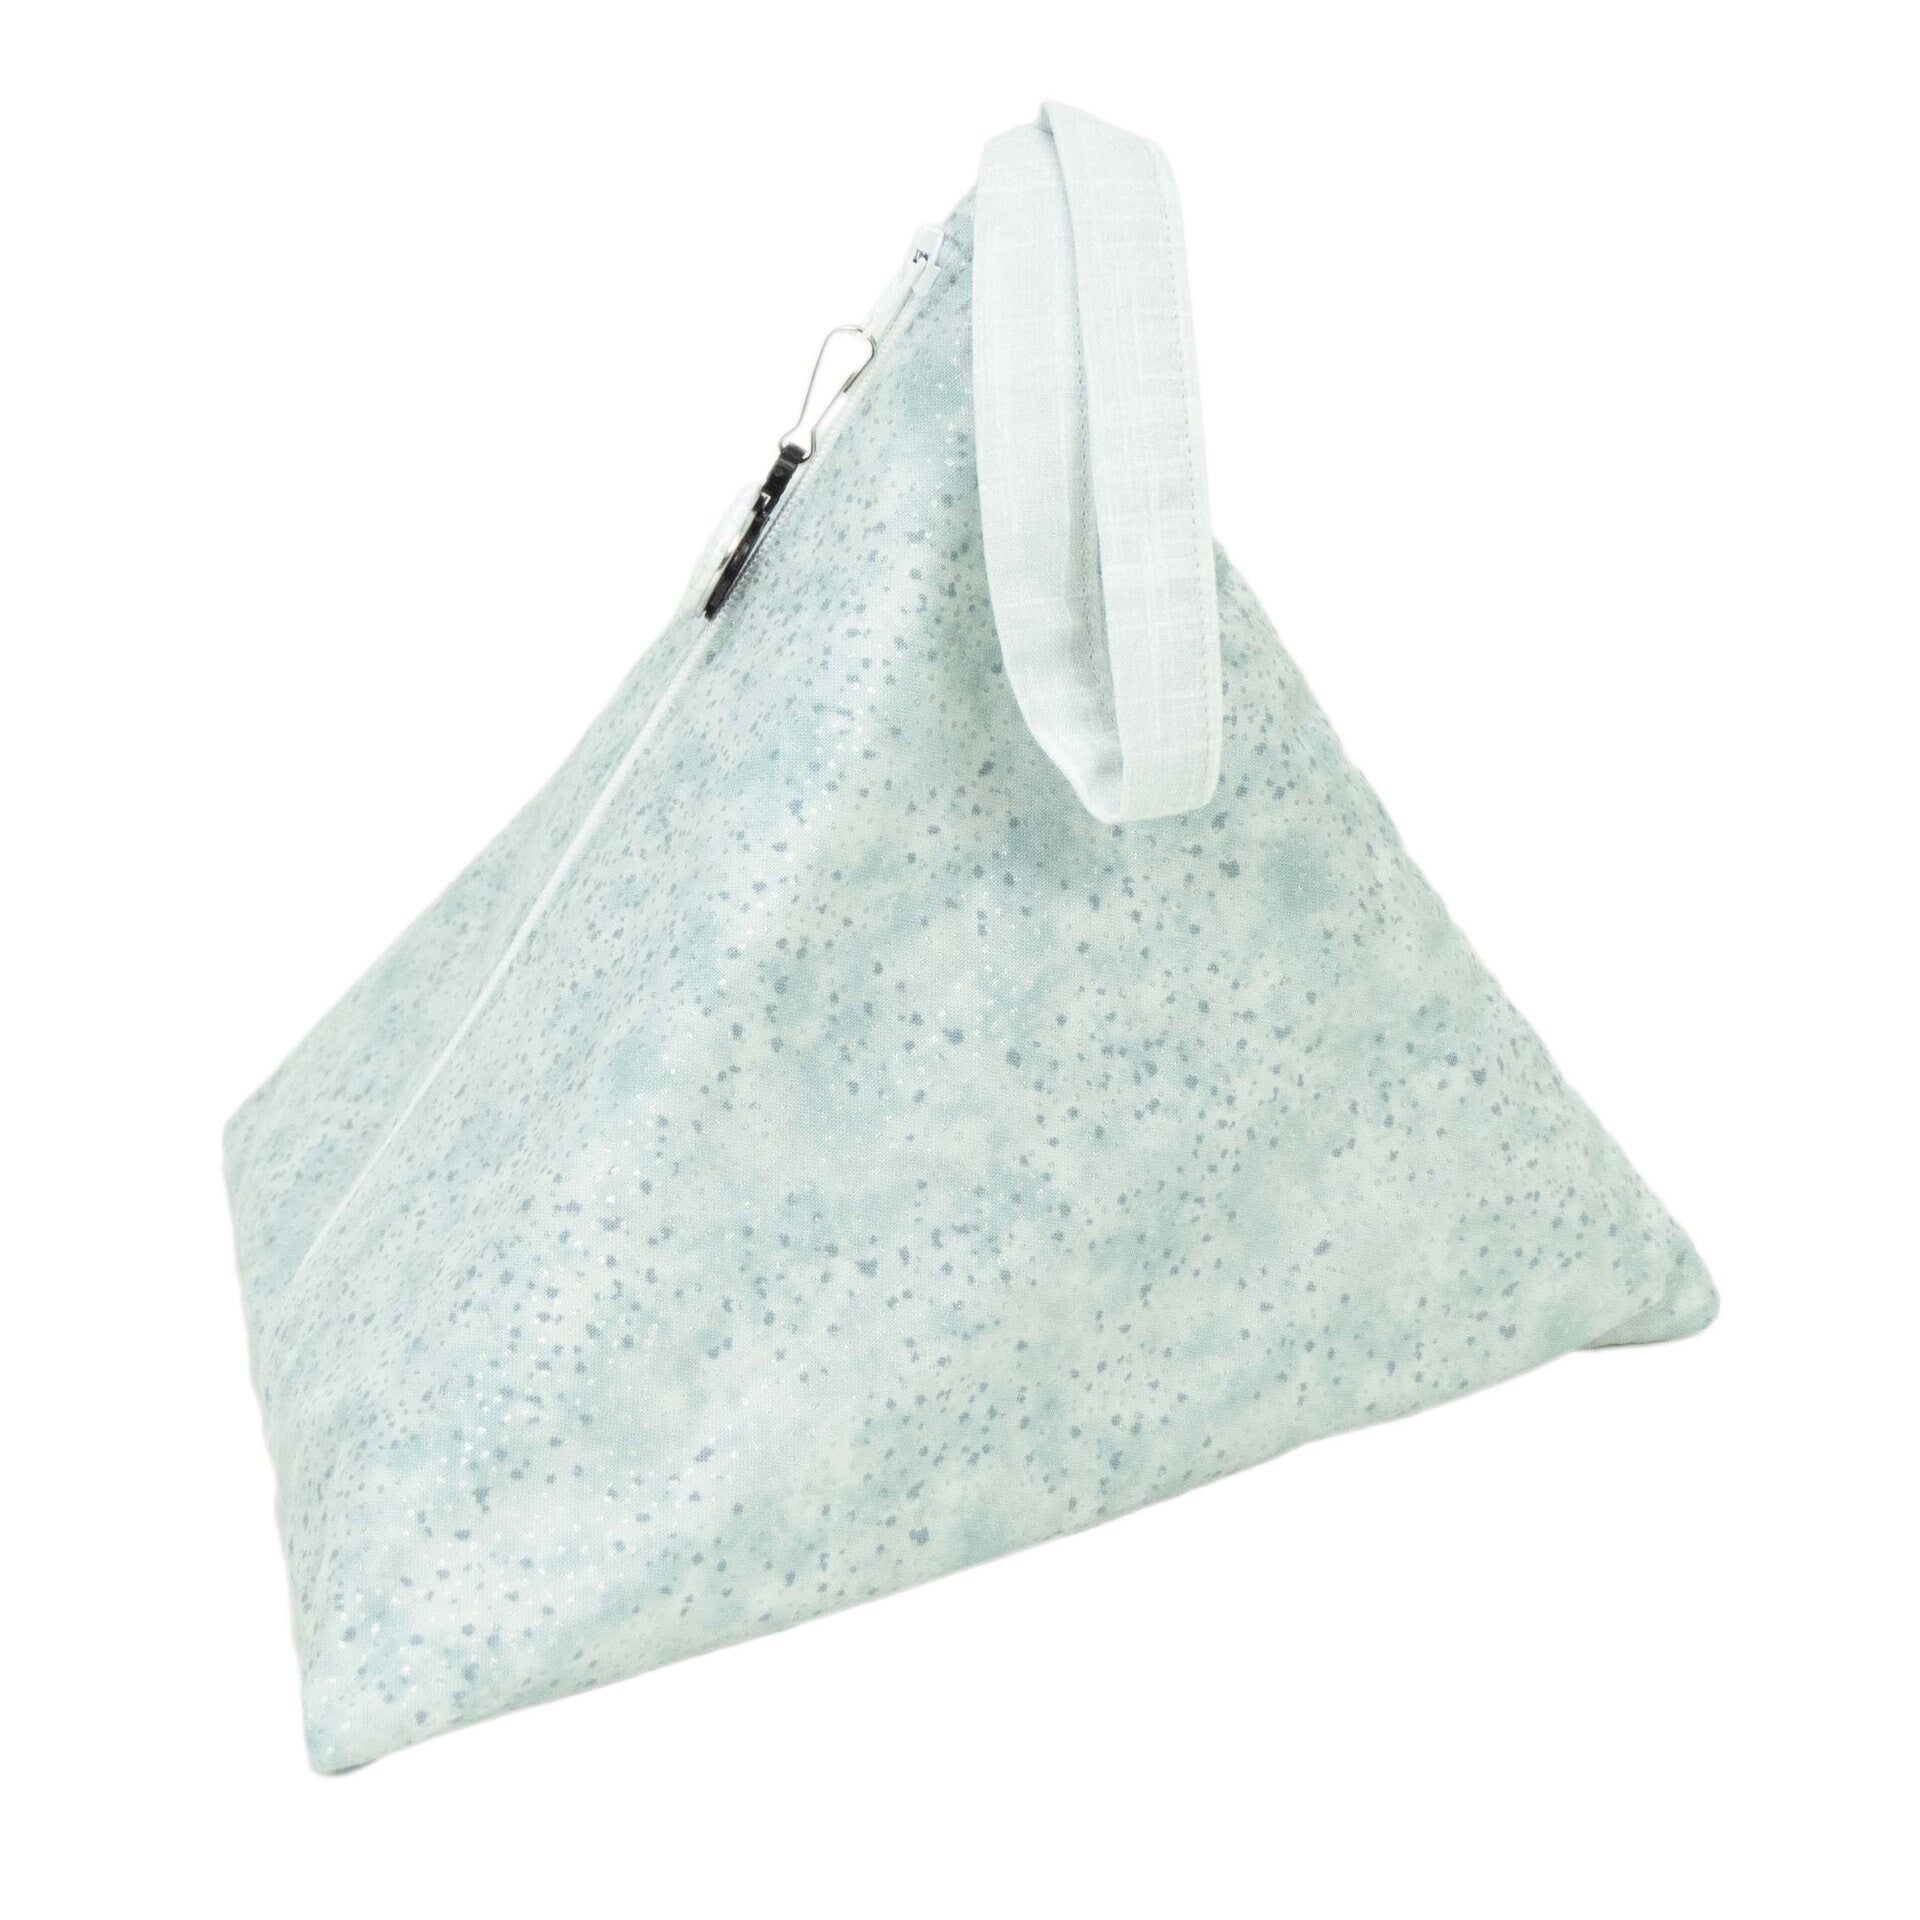 Metallic Pale Polka Dot - Llexical Divided Sock Pouch - Knitting, Crochet, Spinning Project Bag